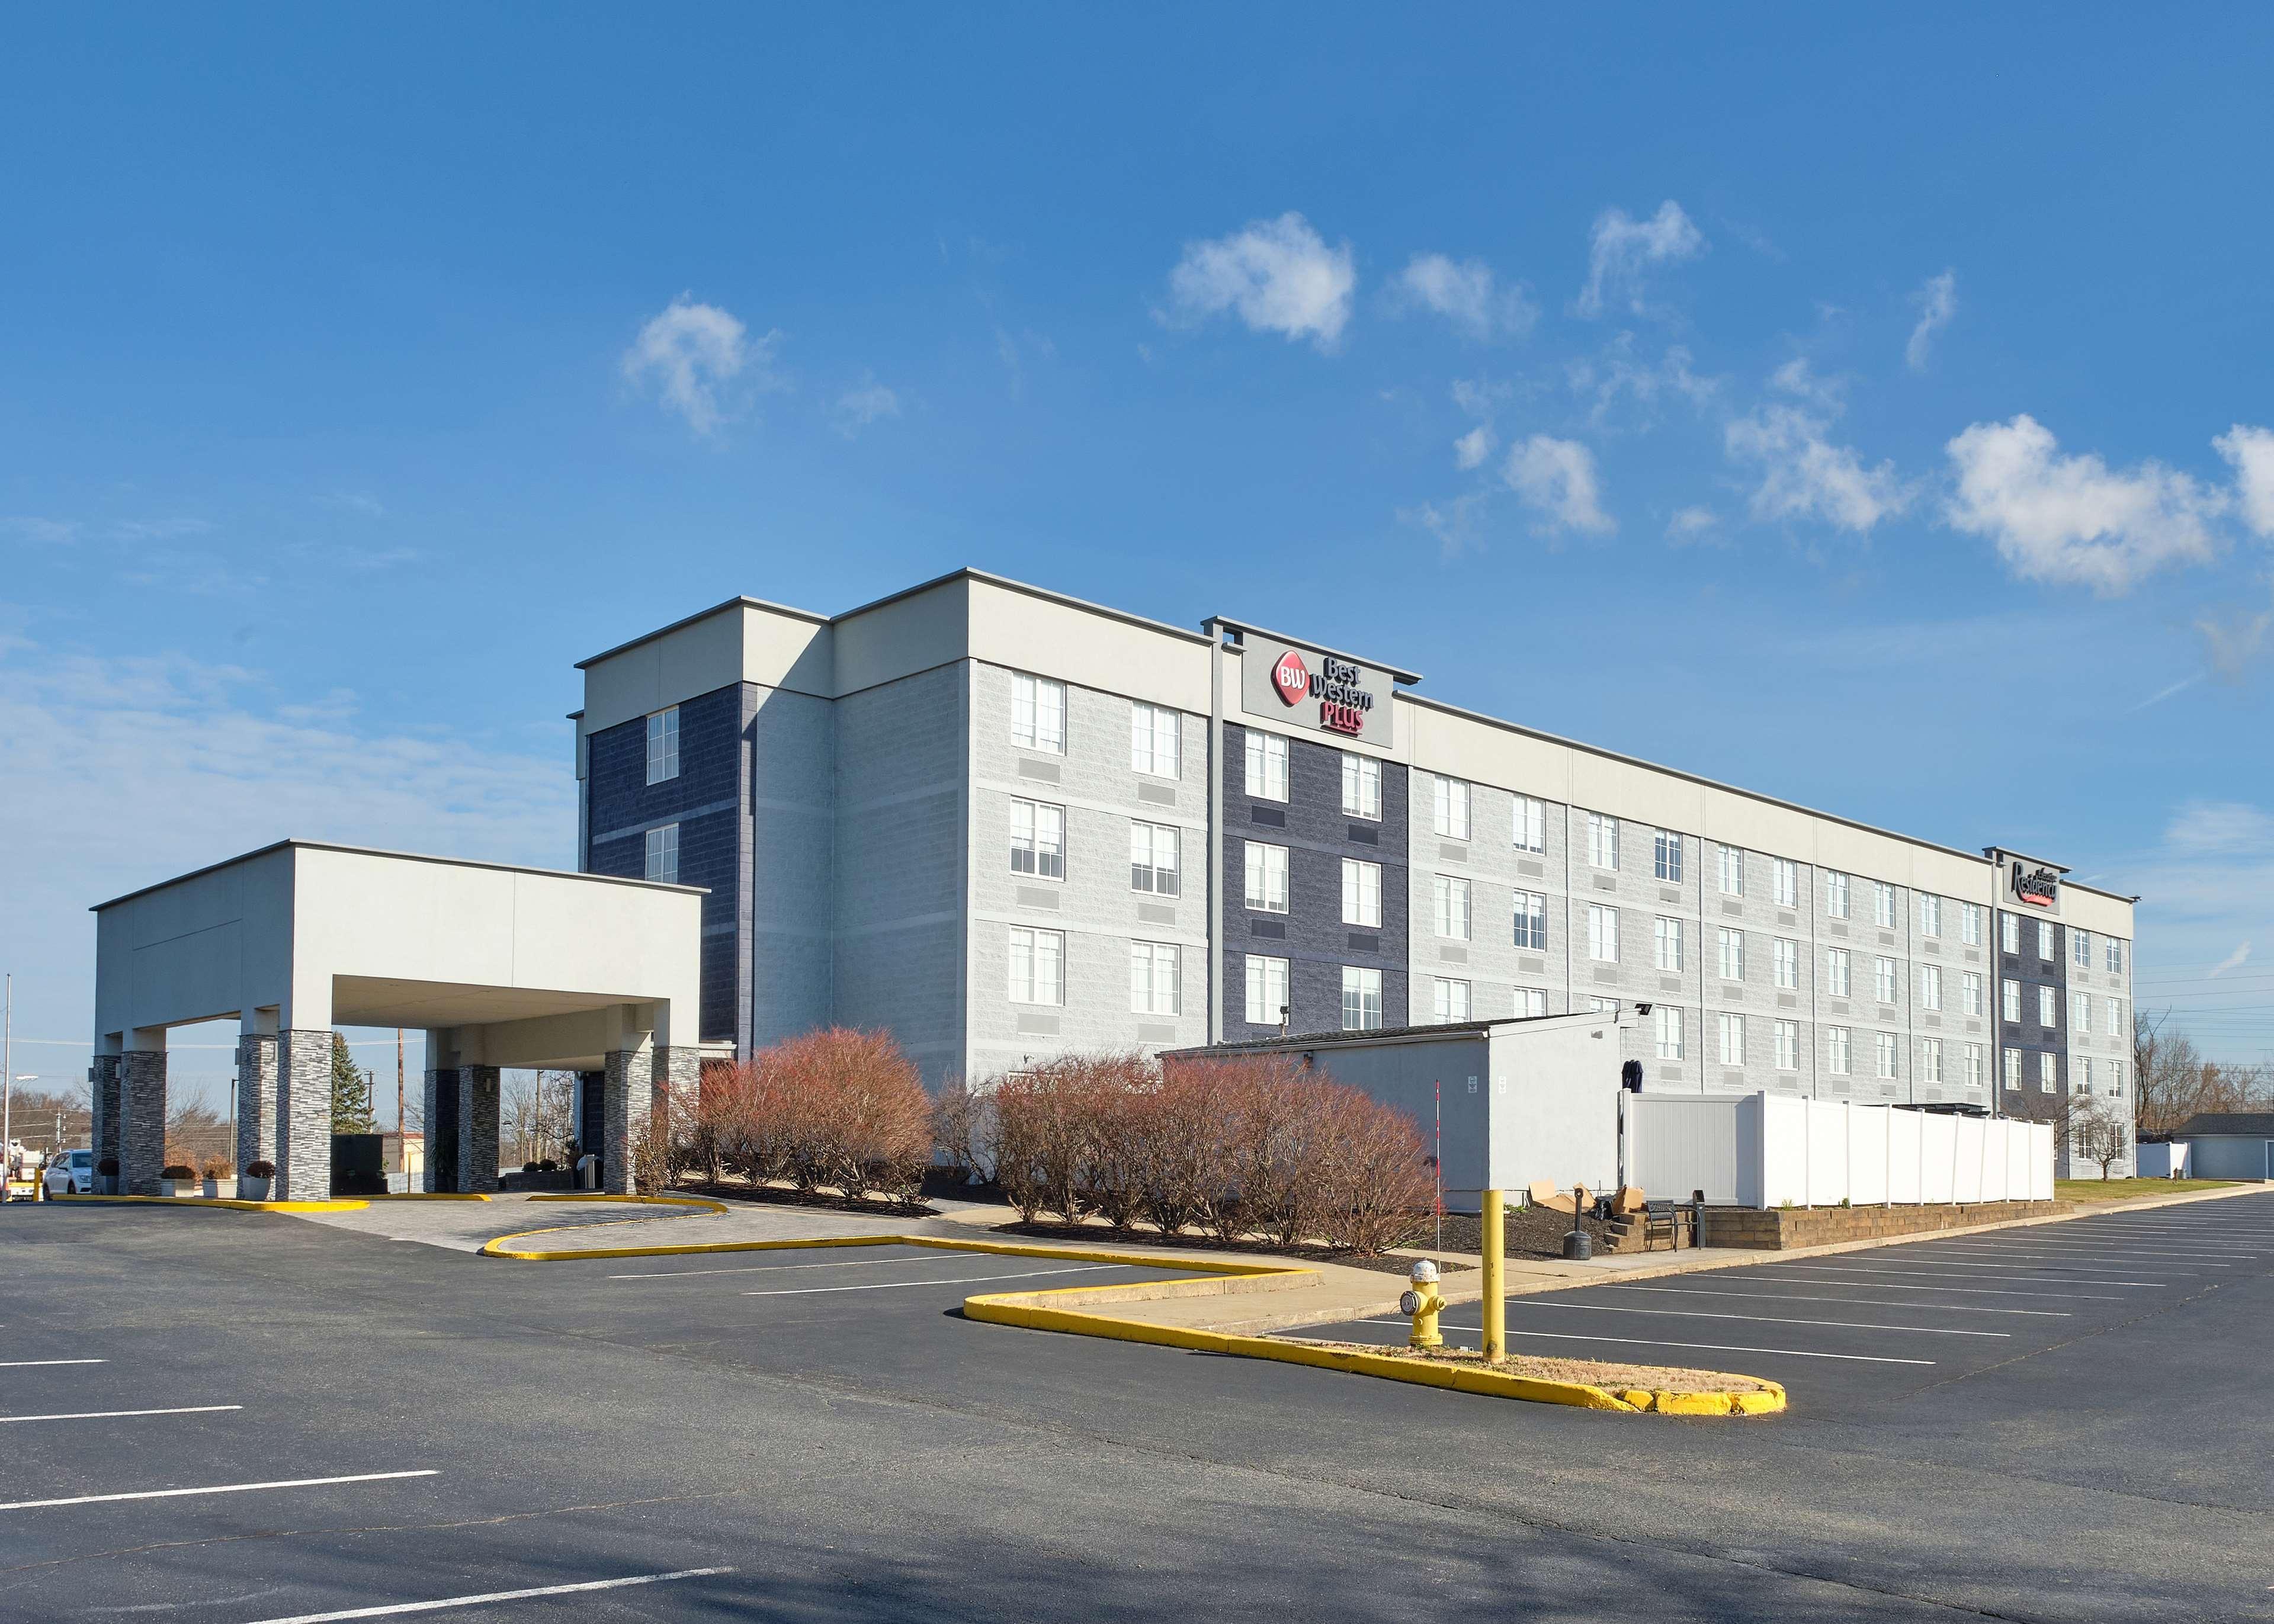 Holiday Inn Express & Suites West Long Branch - Eatontown, West